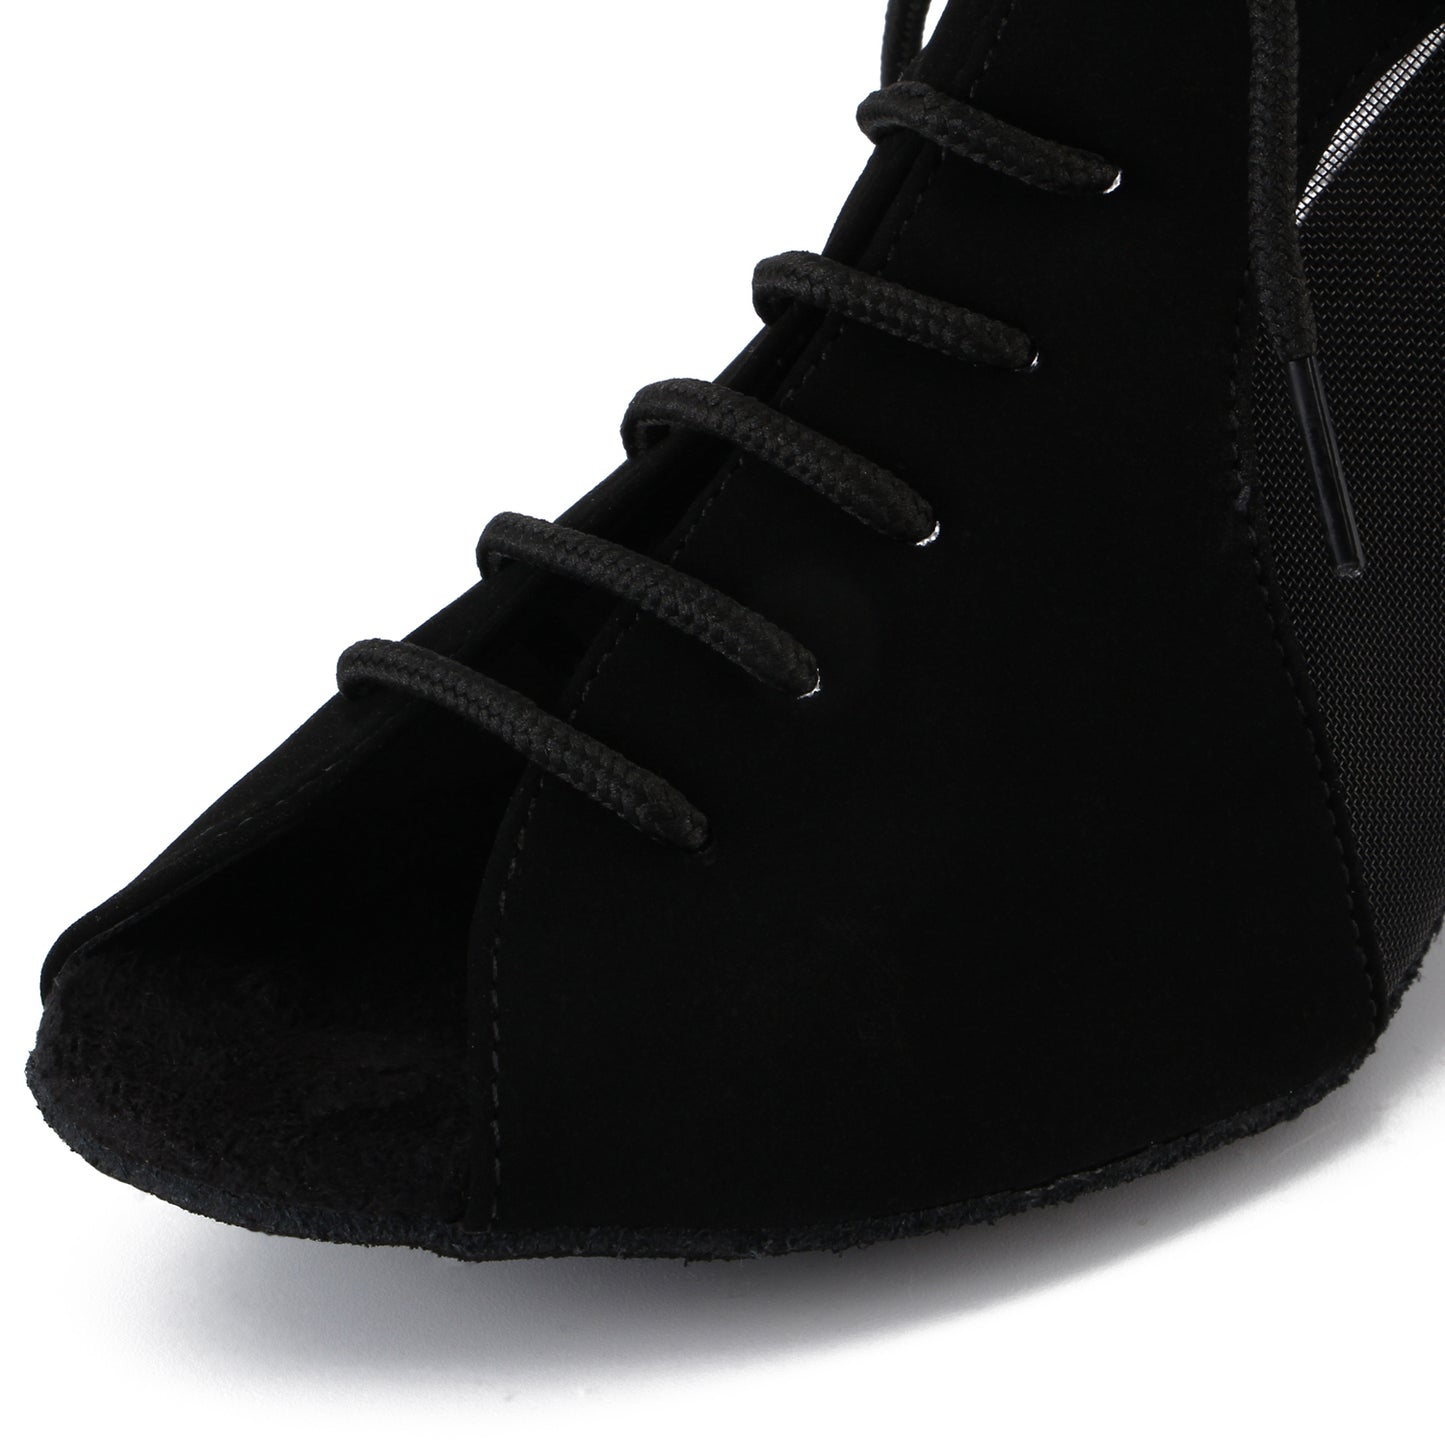 Women Ballroom Dancing Shoes with Suede Sole, Lace-up Open-toe Design in Black for Tango Latin Practice (PD-3003A)1